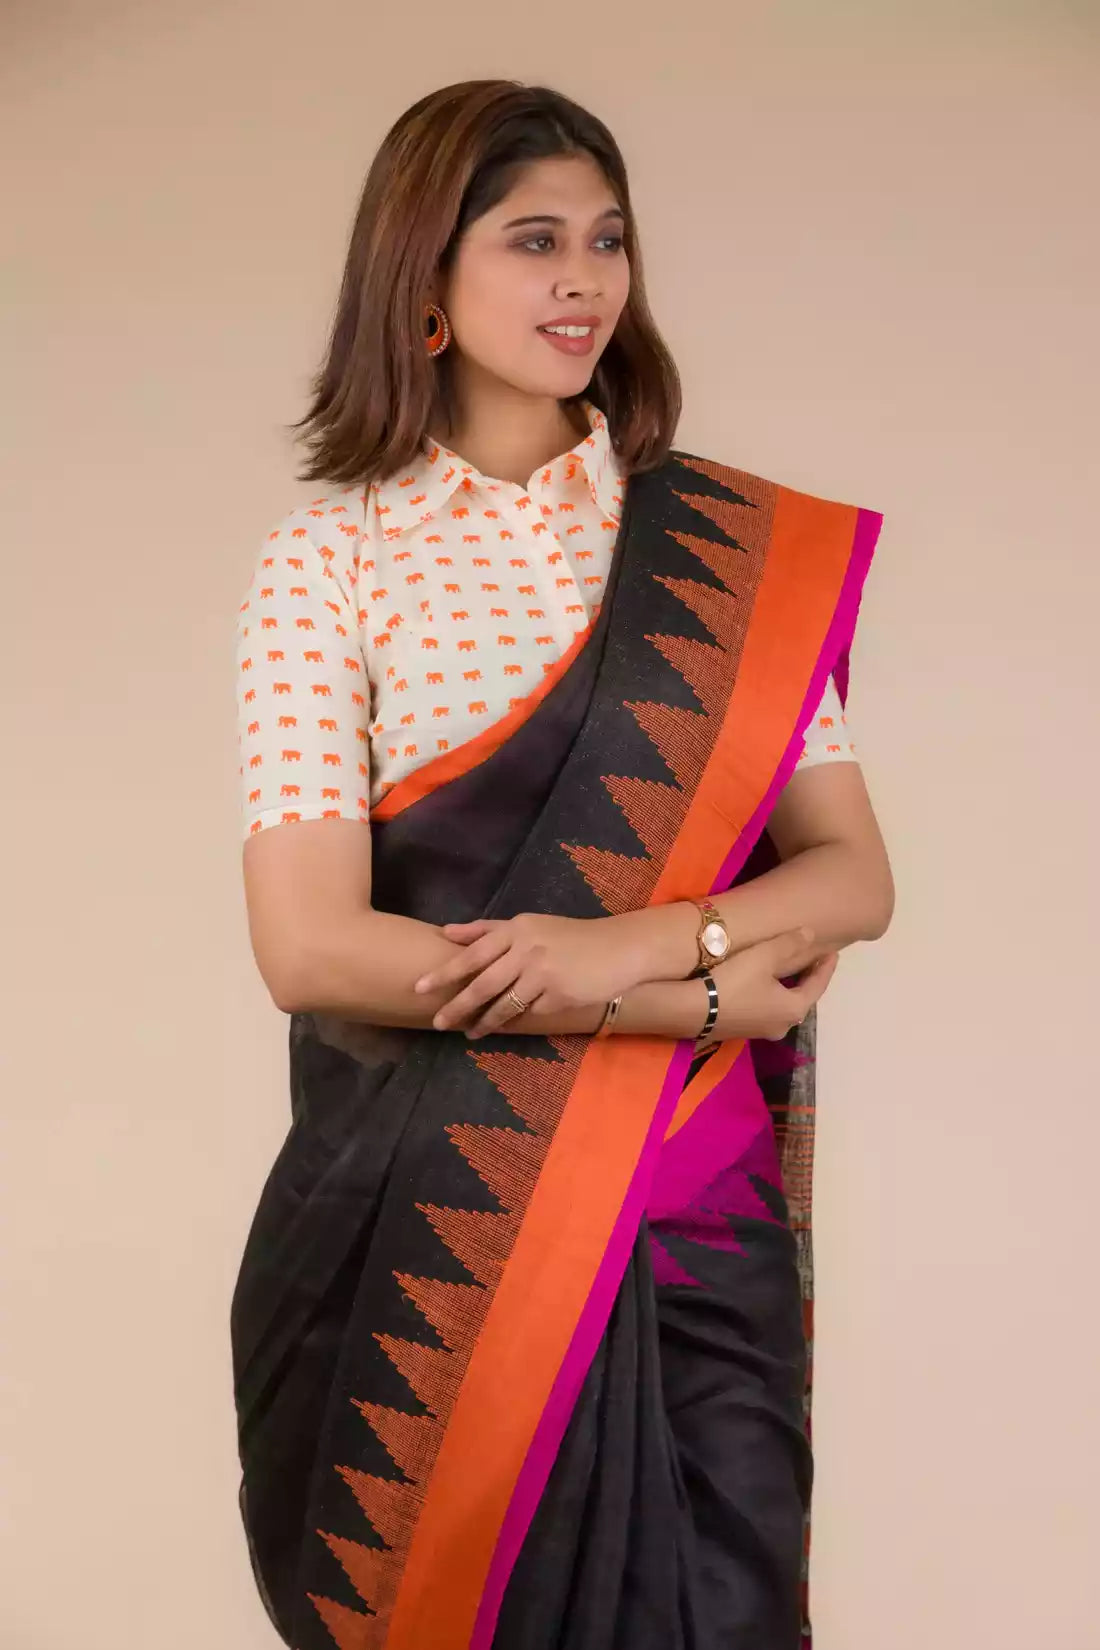 This is image of formal office wear saree which is in Black with Orange and pink border Jamdani hand weaving Saree